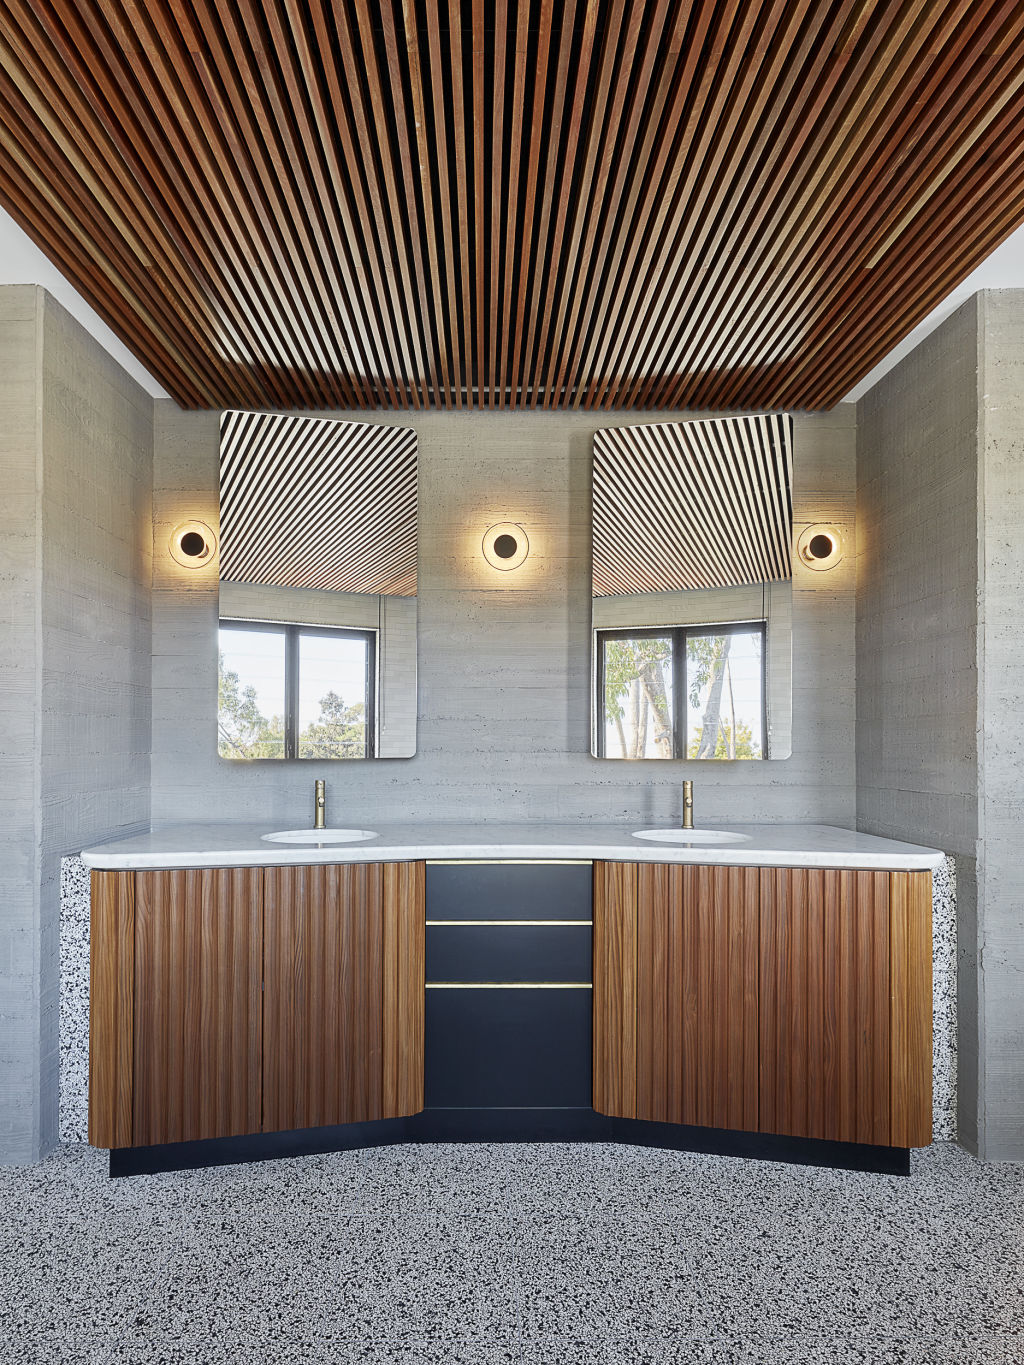 Timber, terrazzo and concrete take centre stage here. Photo: Jack Lovel